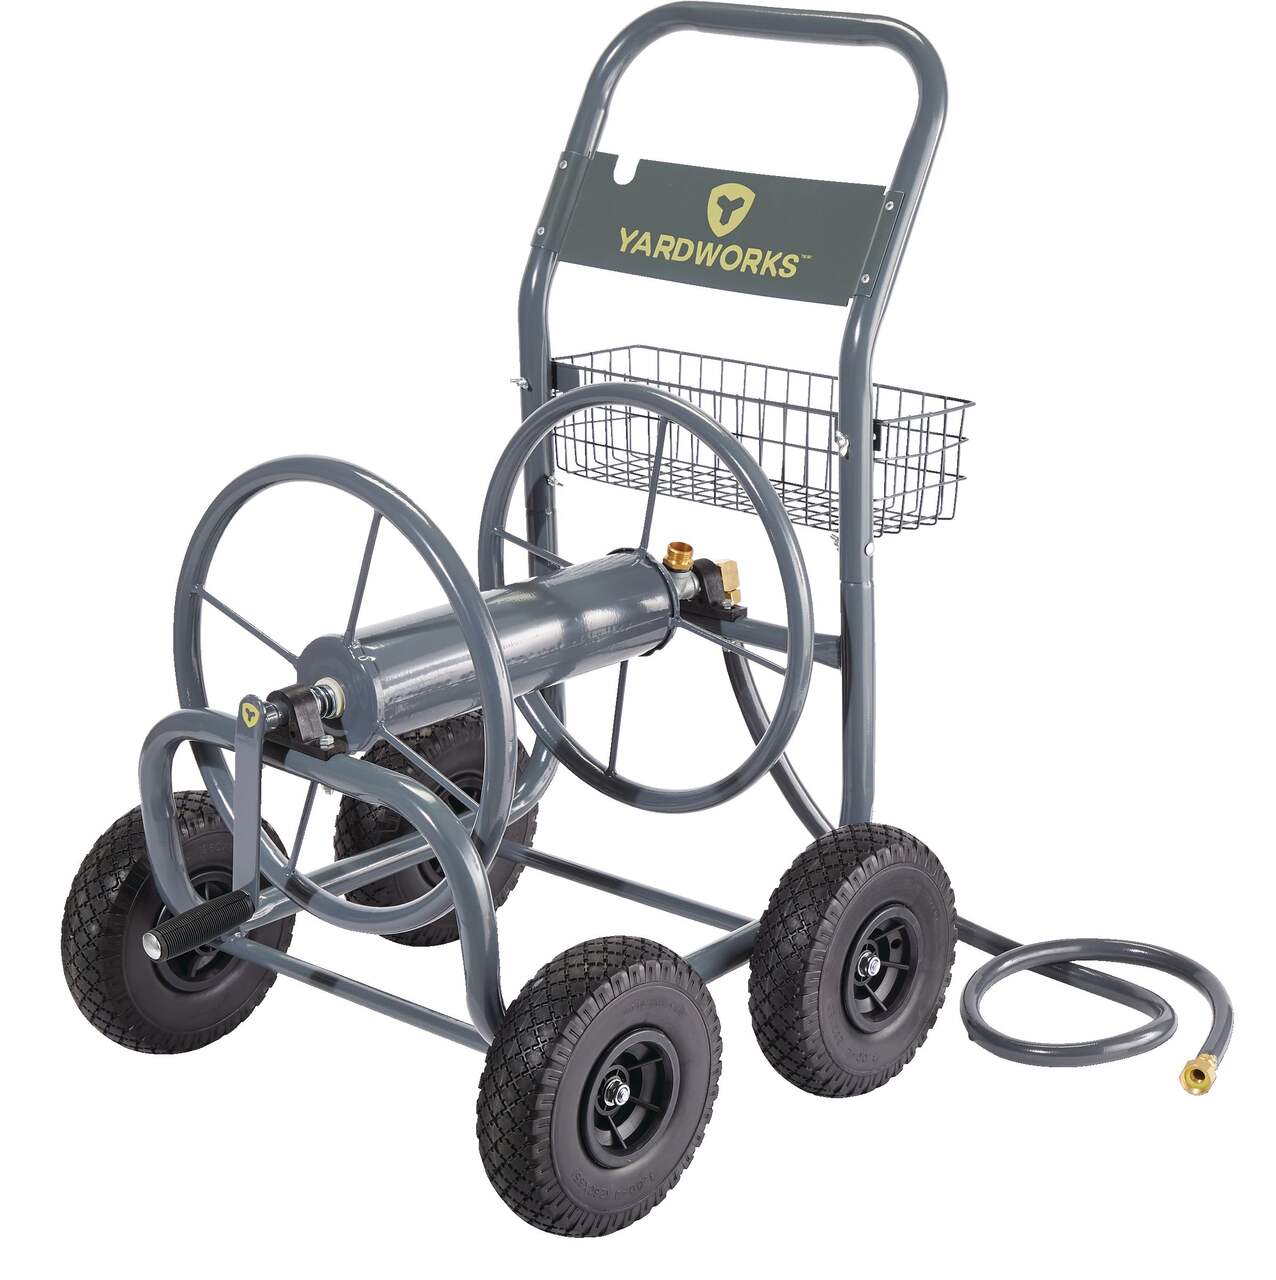 https://media-www.canadiantire.ca/product/seasonal-gardening/outdoor-tools/watering/0593489/yardworks-steel-hose-reel-cart-with-4-flat-free-tires-61ea3d27-5a4a-4c6f-bb39-7aa4a4e657bb-jpgrendition.jpg?imdensity=1&imwidth=1244&impolicy=mZoom